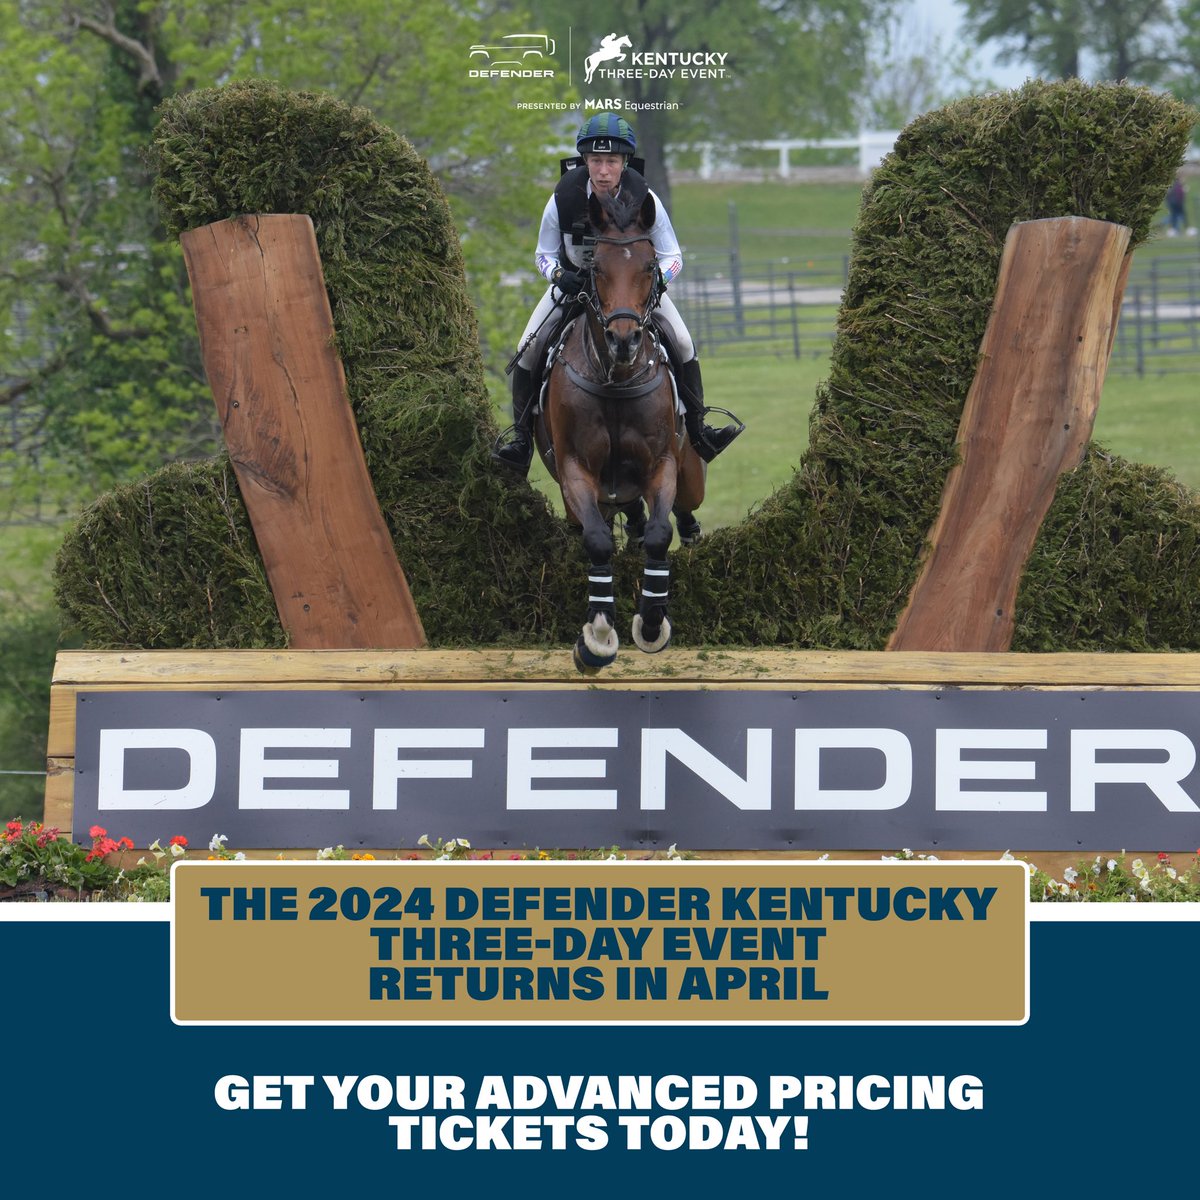 The 2024 Defender Kentucky Three-Day Event Returns in April. 🐴 Get Your Advanced Pricing Tickets Today with the link below: kentuckythreedayevent.com/tickets